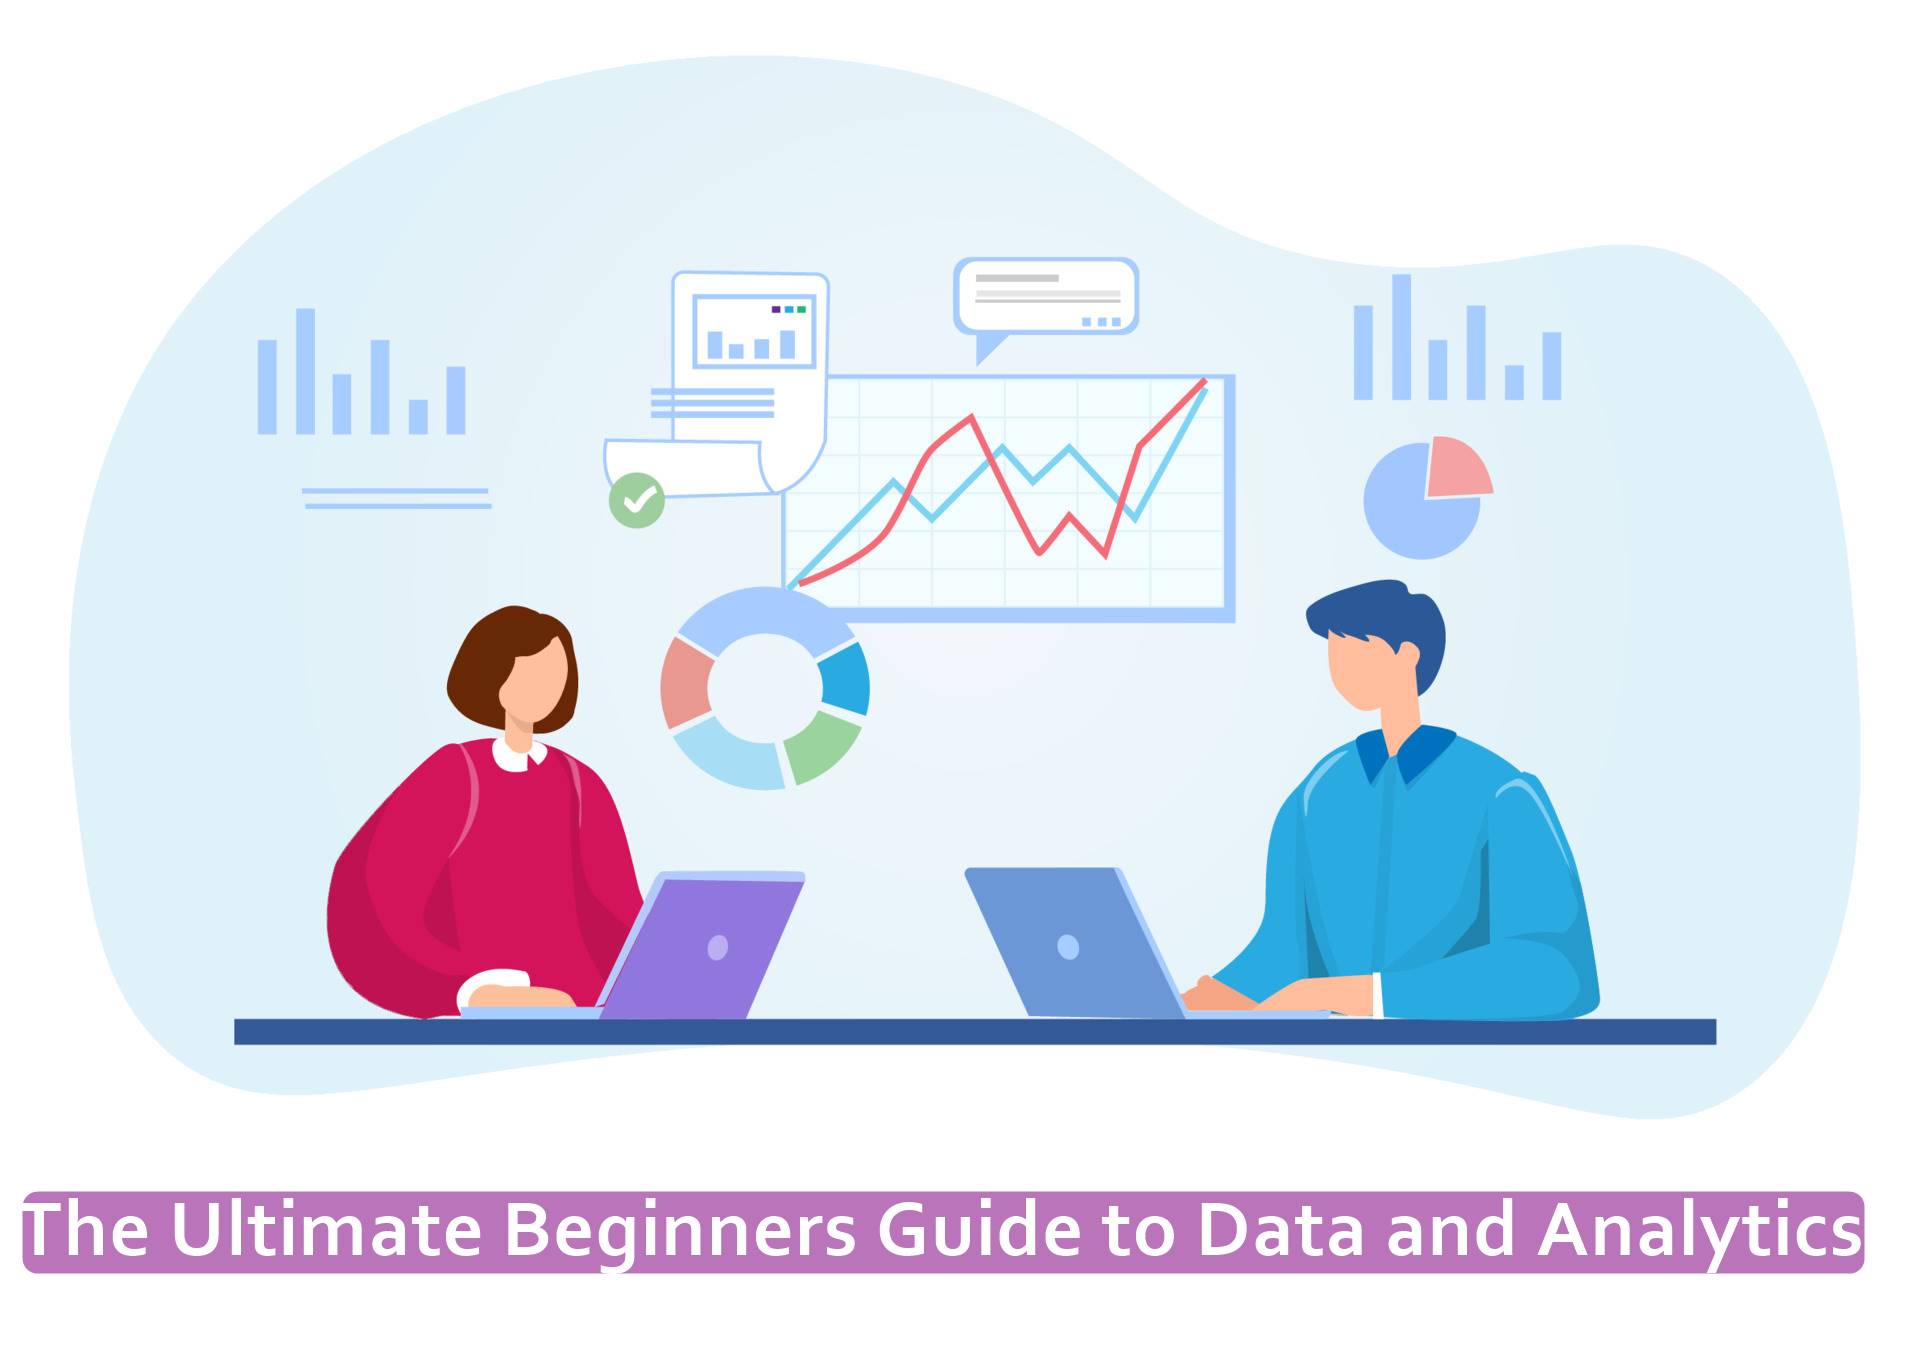 The Ultimate Beginners Guide to Data and Analytics